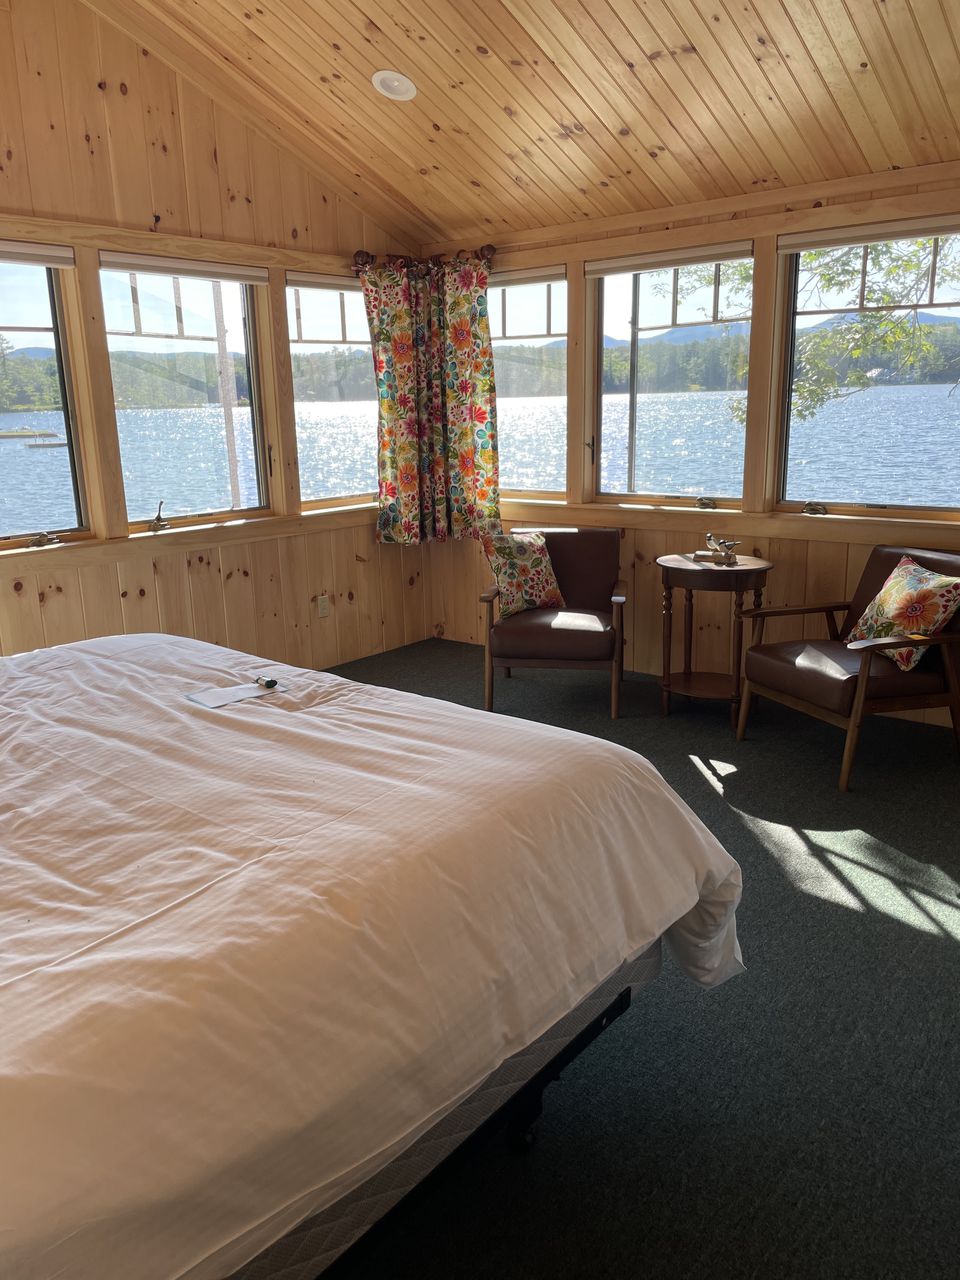 Panoramic views of Kezar Lake from Maestro, a 2 bedroom and 2 bath cabin.